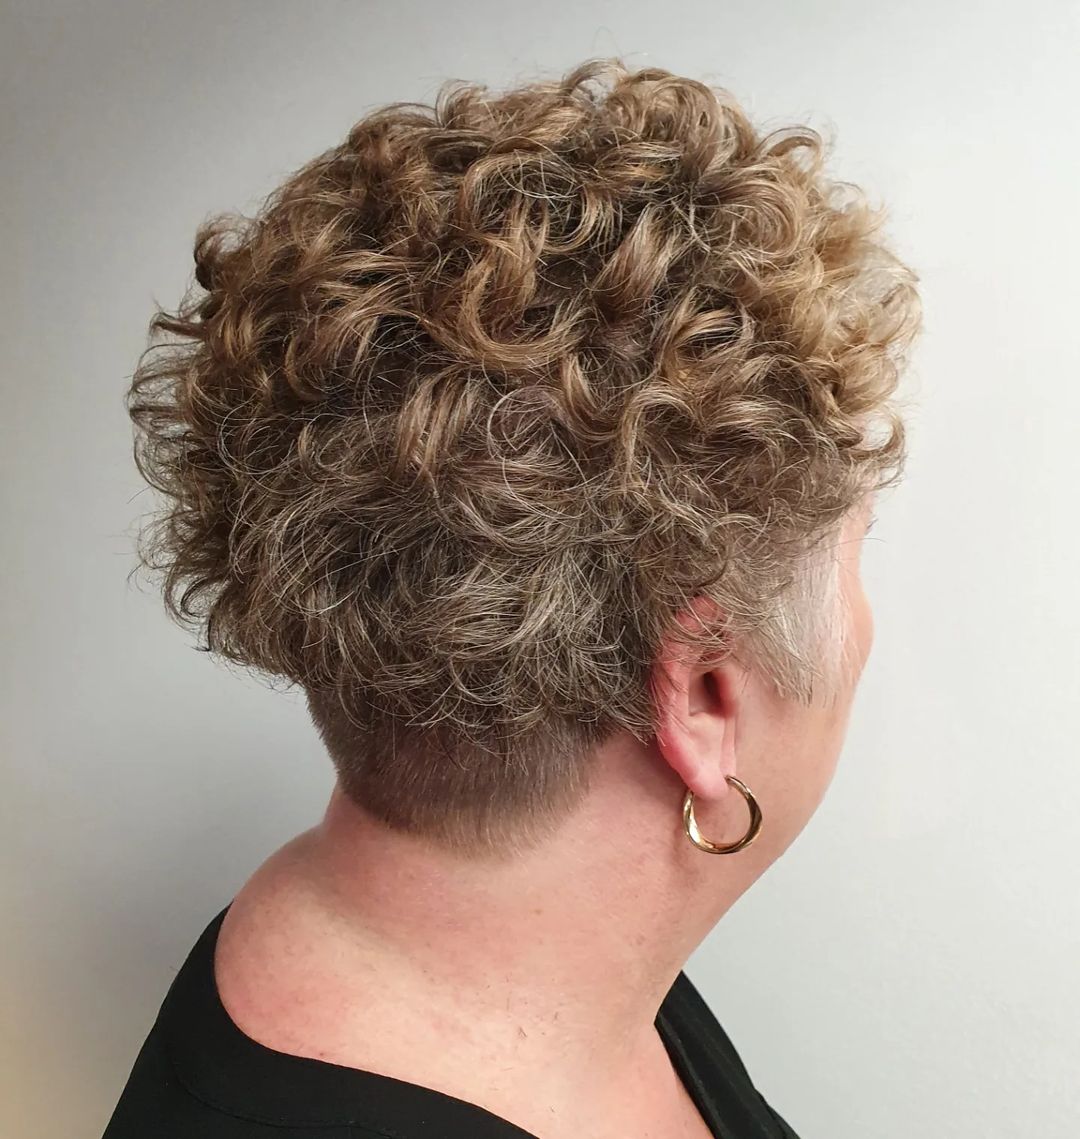 Perms for Older Women: Revitalize Your Look with These Gorgeous Hairstyles